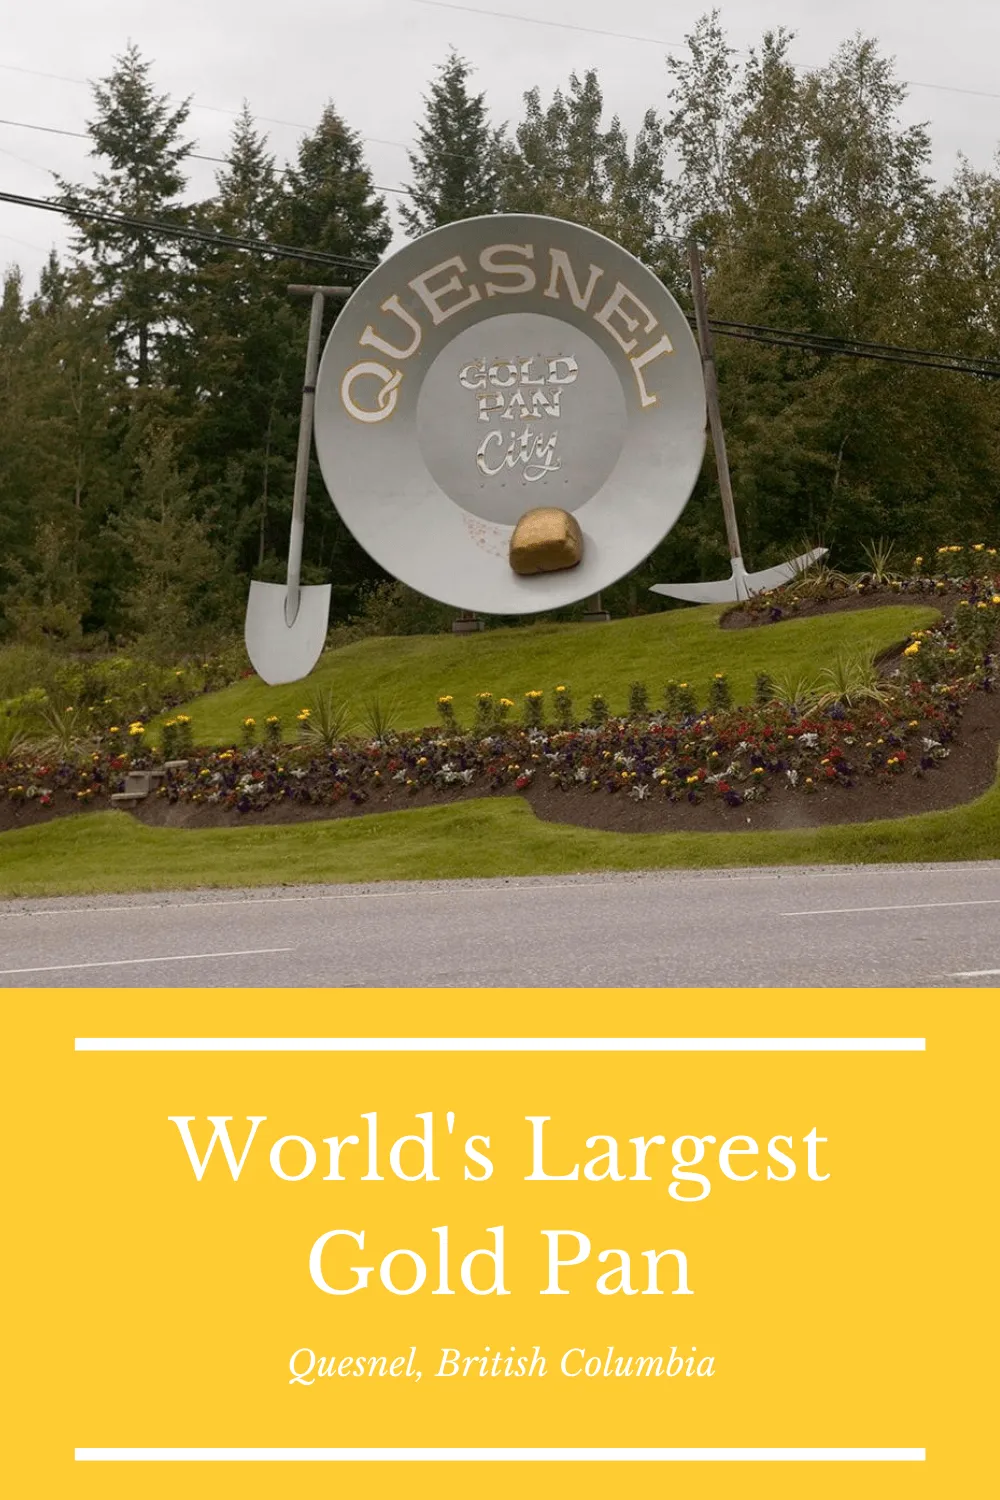 Since 1987 Quesnel, British Columbia has been home to this Canadian roadside attraction: the world's largest gold pan in "Gold Pan City." Visit this stop on the Gold Rush Trail on your next Canadian road trip. #CanadianRoadsideAttractions #CanadianRoadsideAttraction #RoadsideAttractions #RoadsideAttraction #RoadTrip #CanadaRoadTrip #CanadaRoadTripIdeas #CanadaRoadTripItinerary #CrossCanadaRoadTrip #CanadaRoadTripBucketLists #CanadaBucketList #CanadaRoadTripWithKids #BritishColumbia